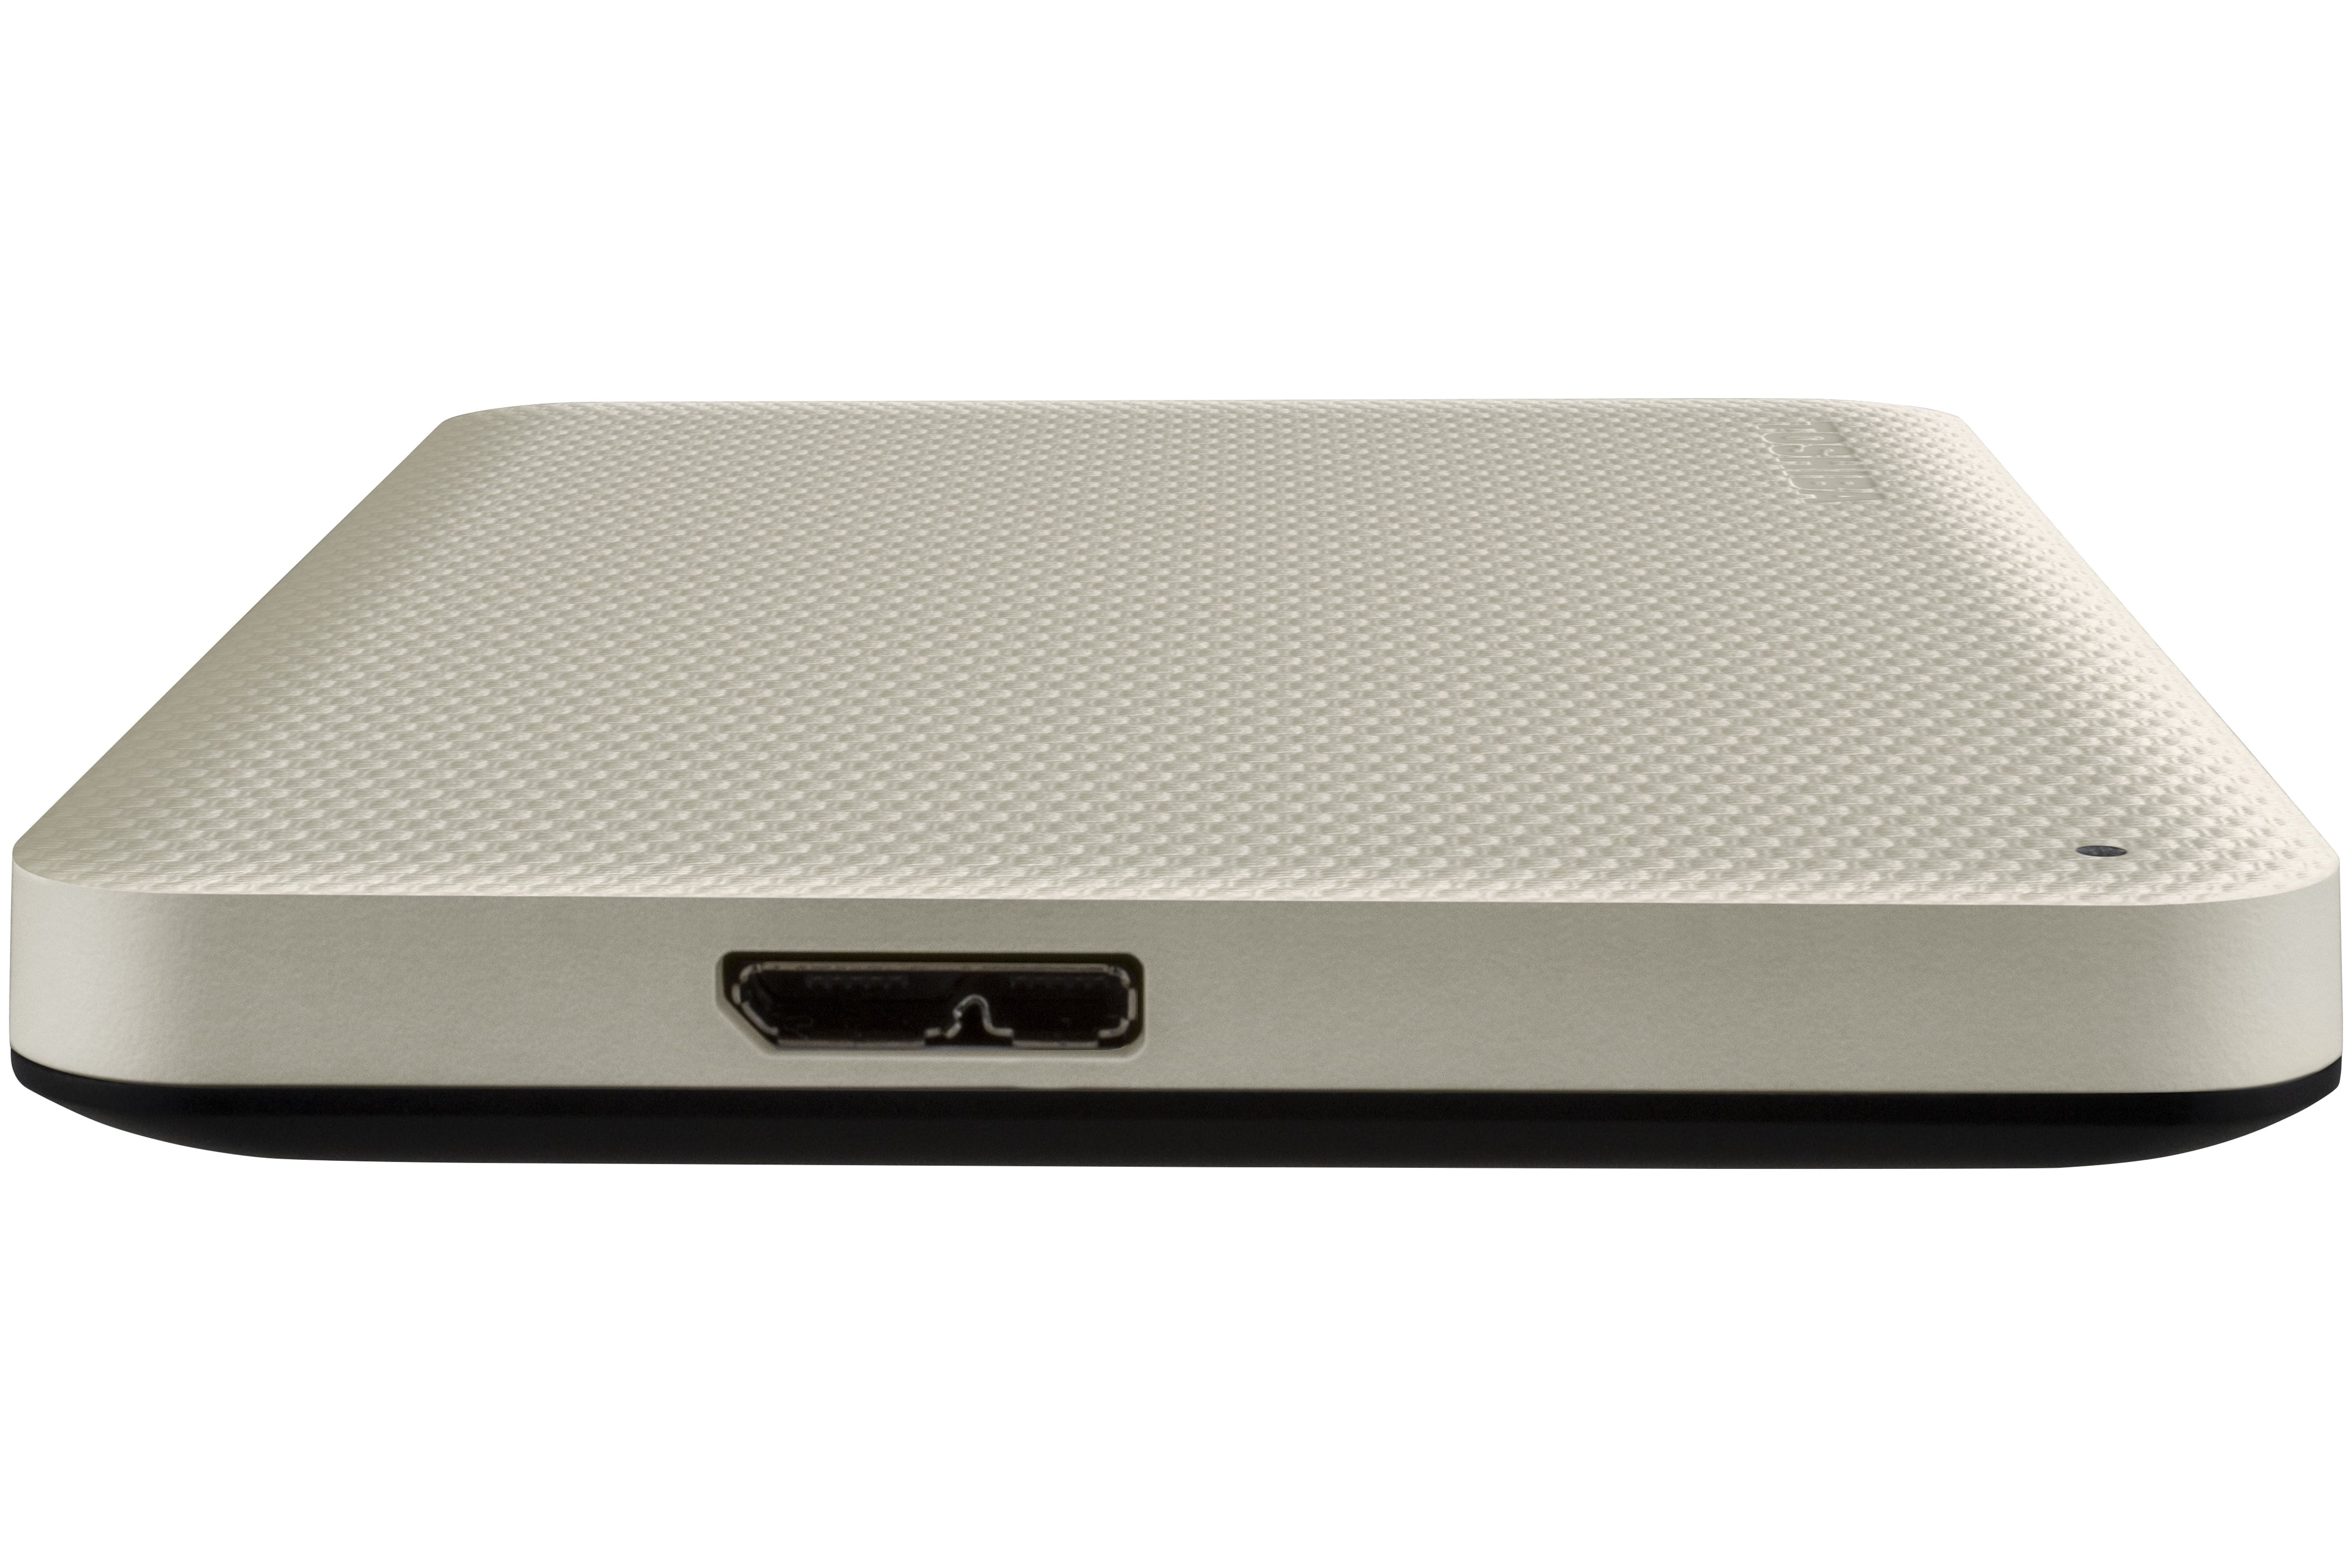 Toshiba CANVIO Advance Plus - Portable External Hard Drive 2TB USB 3.0 -  White (Includes both USB-A and USB-C Cables)